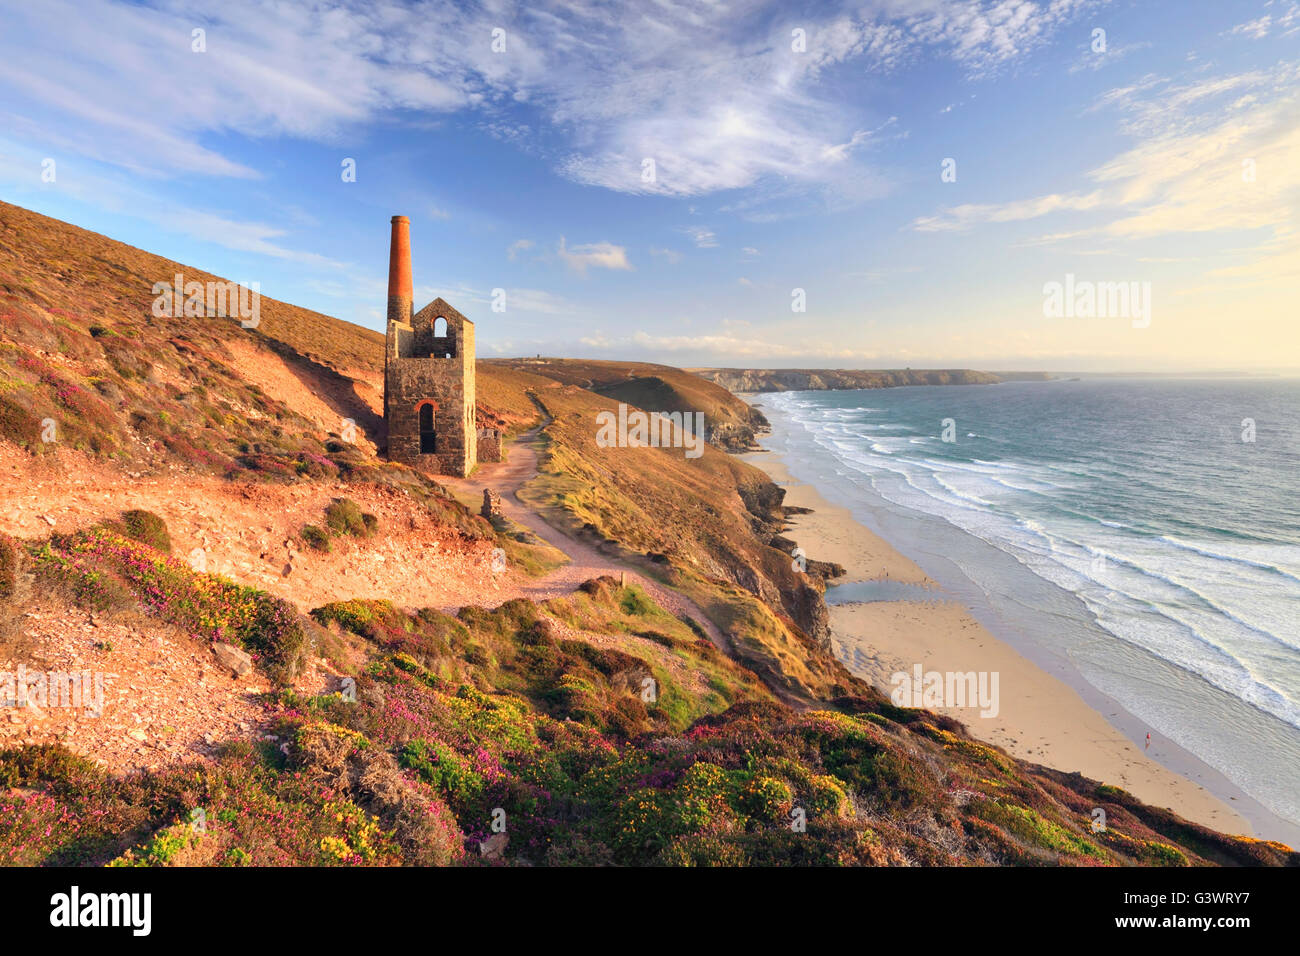 Towanroath Pumping Engine House at Wheal Coates near St Agnes on the North Coast of Cornwall. Stock Photo